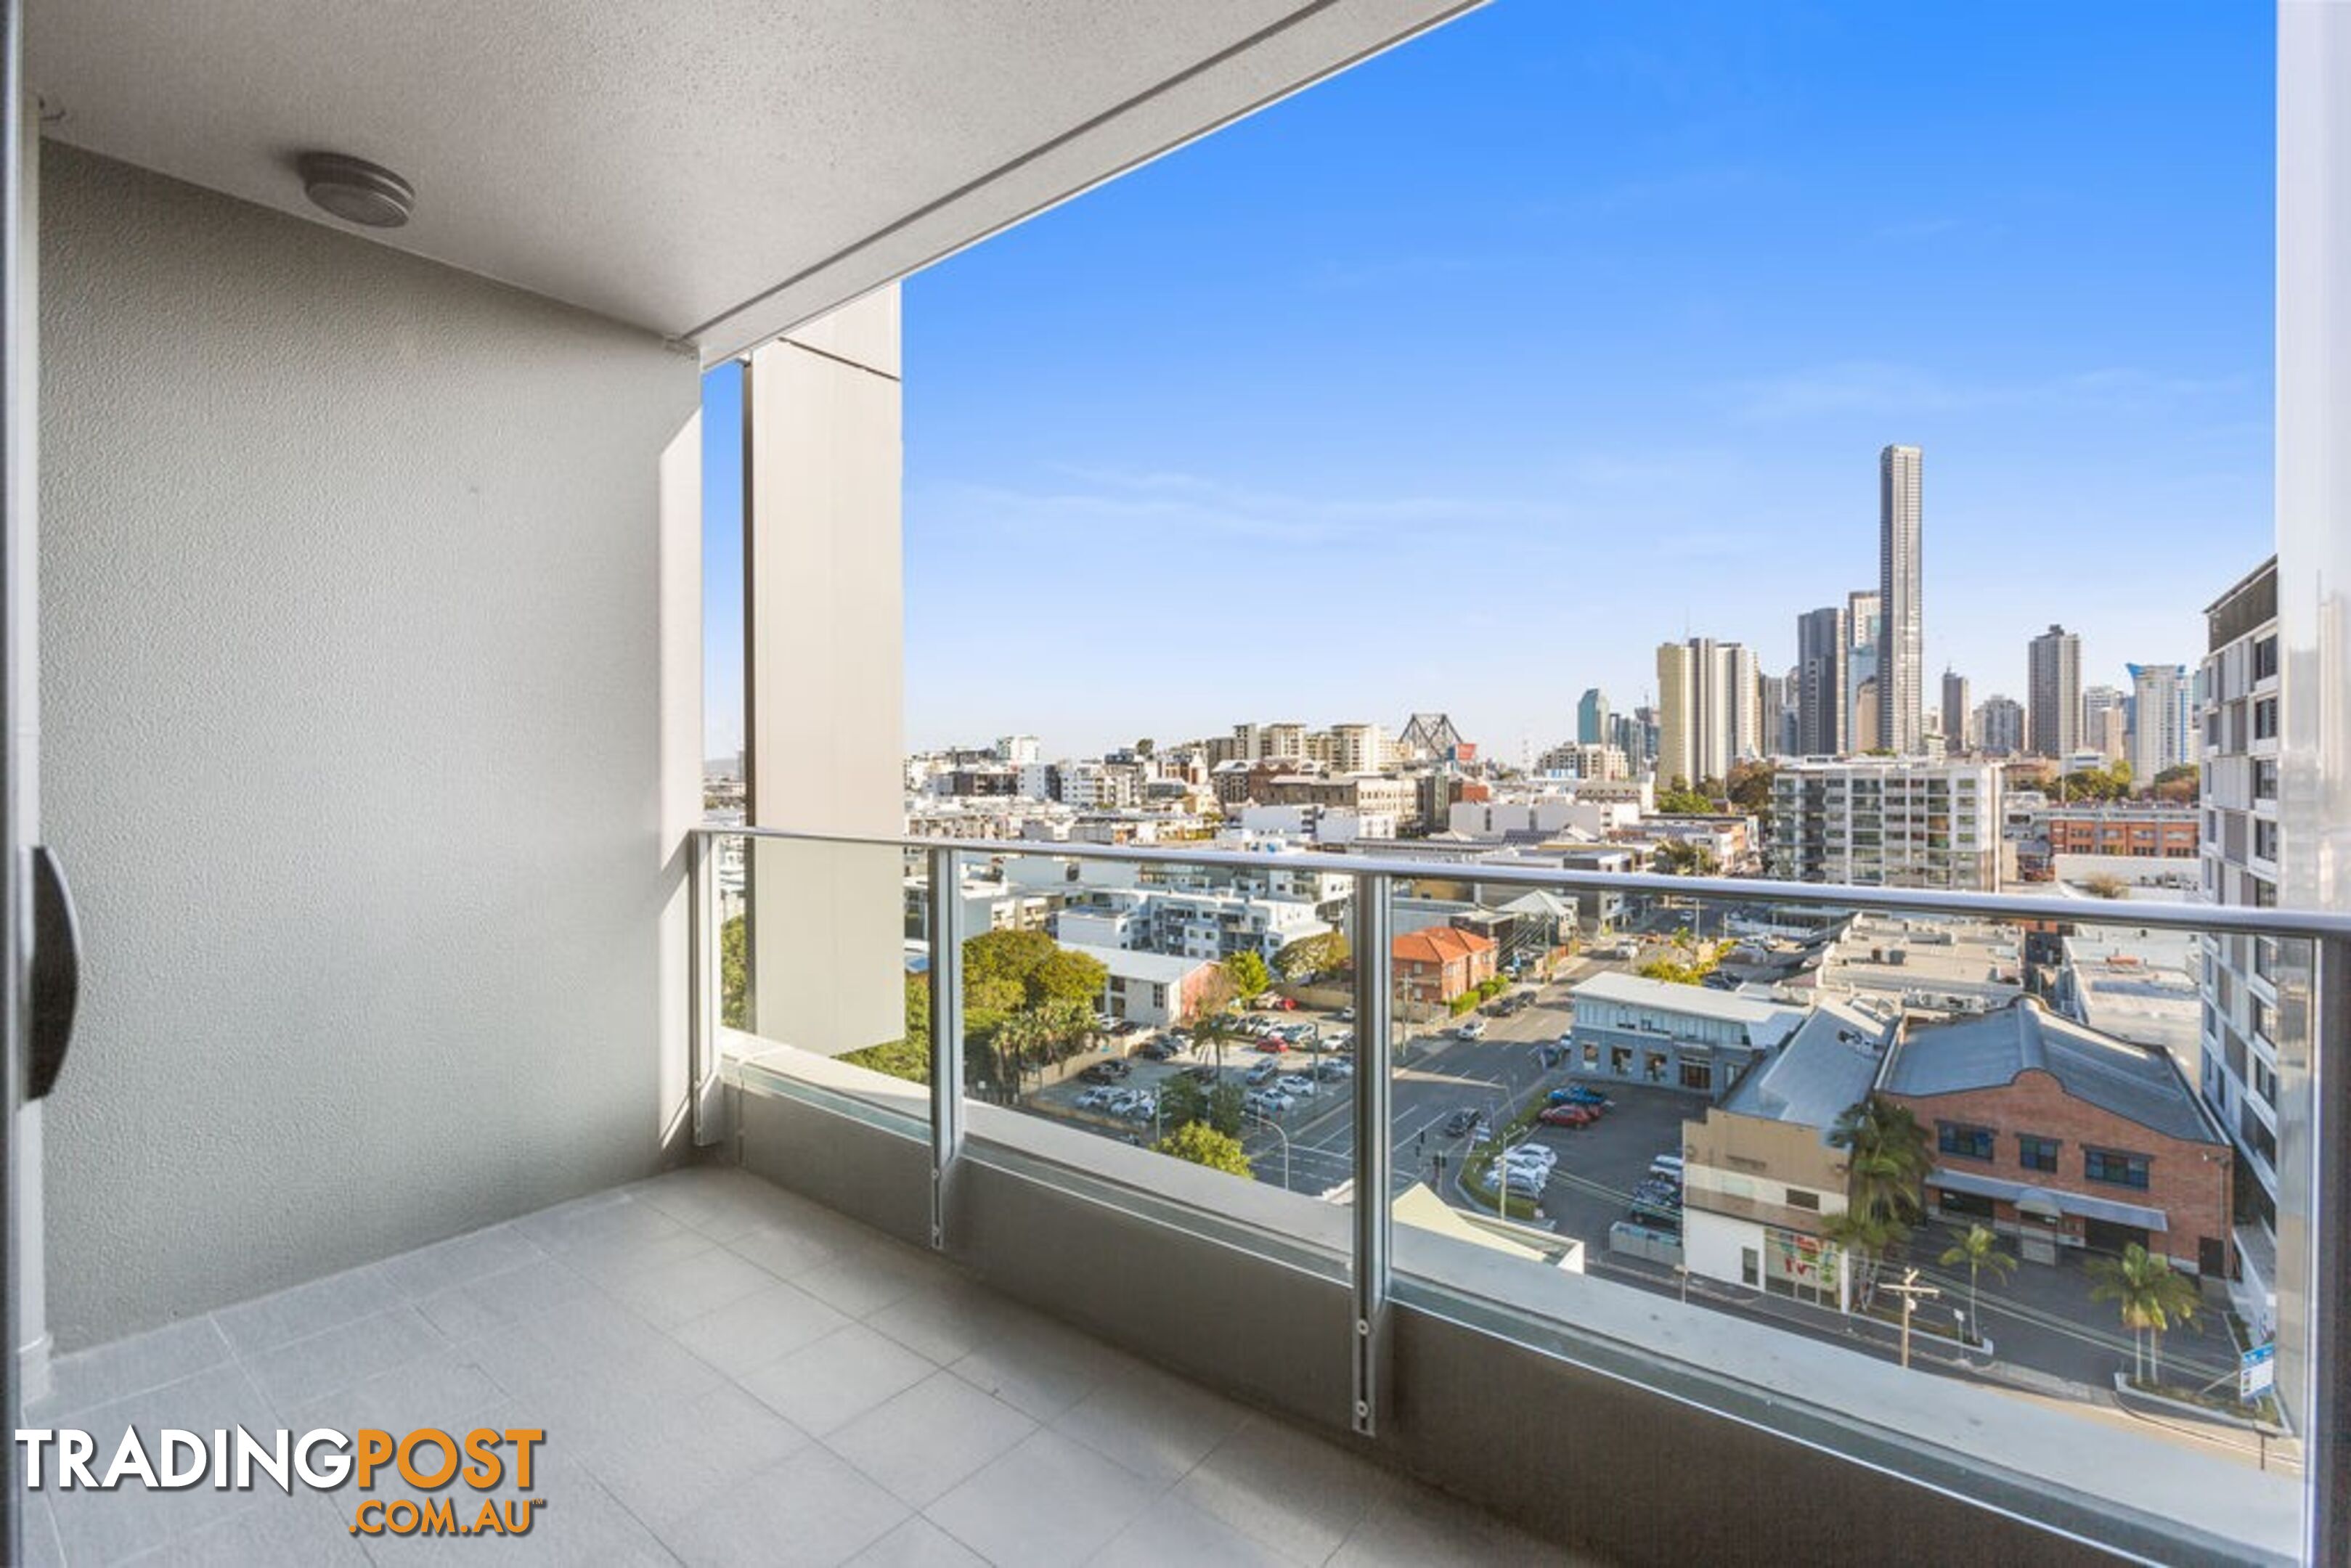 1202/25 Connor Street FORTITUDE VALLEY QLD 4006